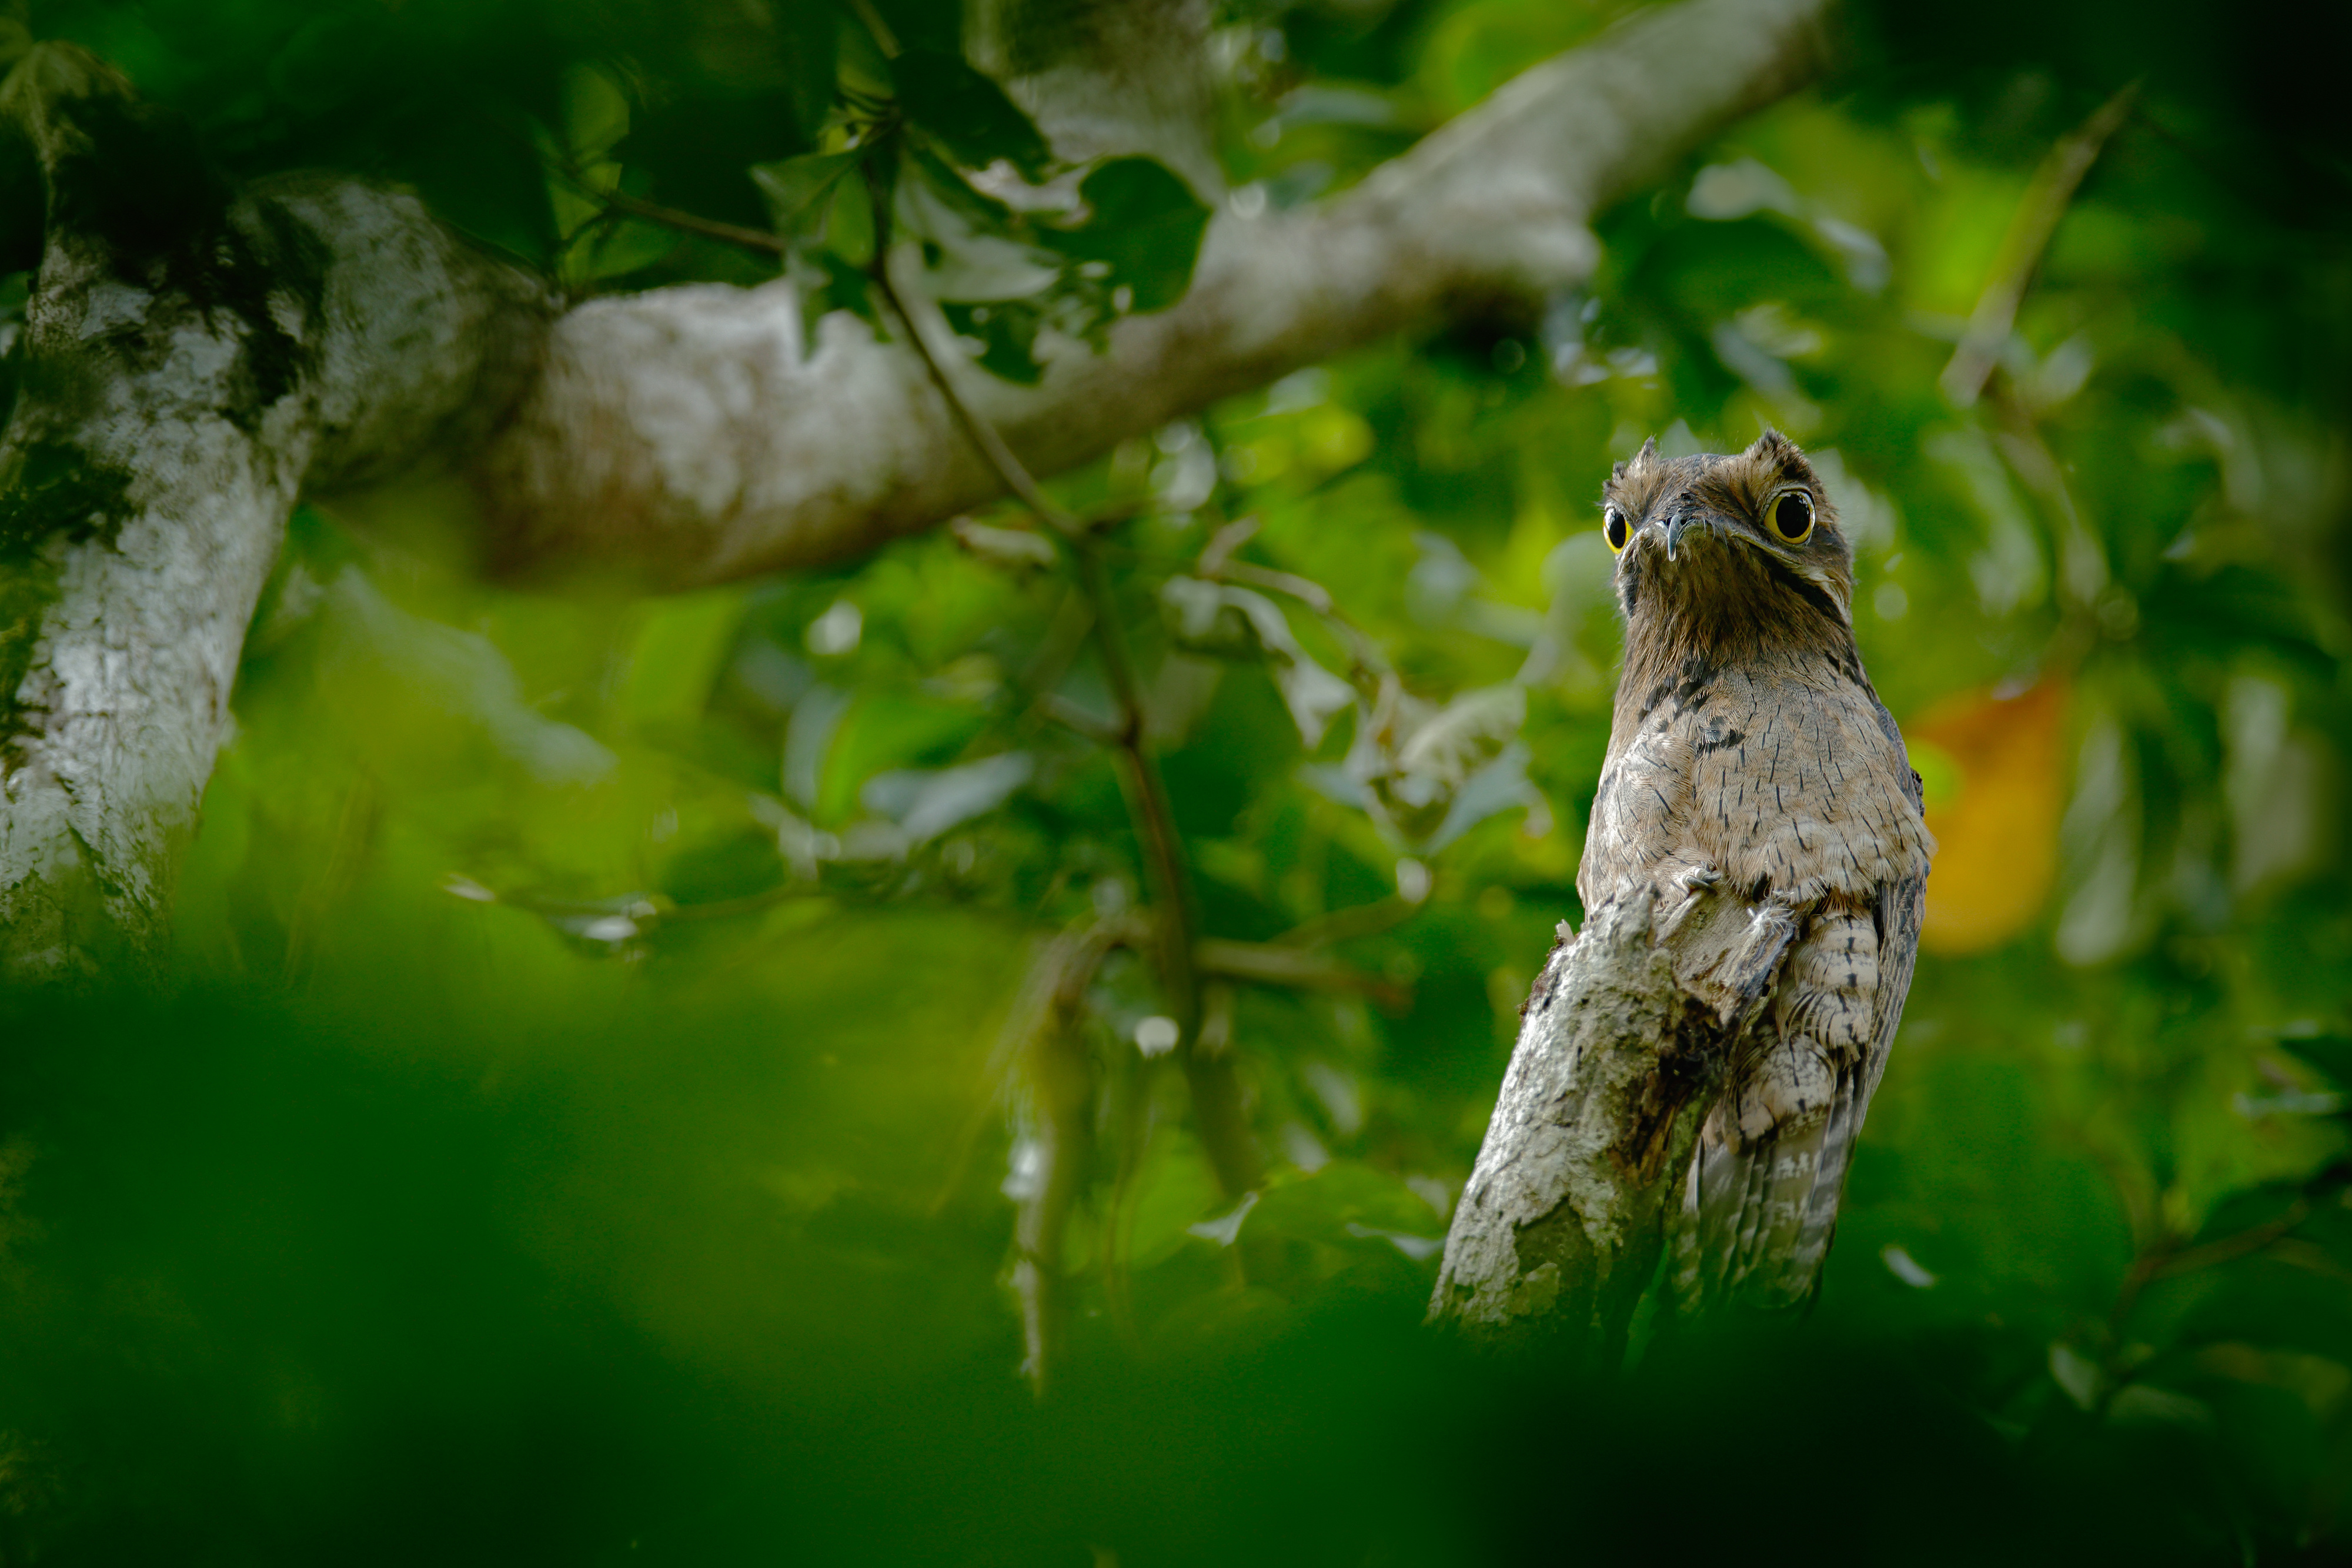 Common Potoo, Nyctibius griseus, on a perch, taken at Asa Wright Nature Centre, Trinidad, West Indies